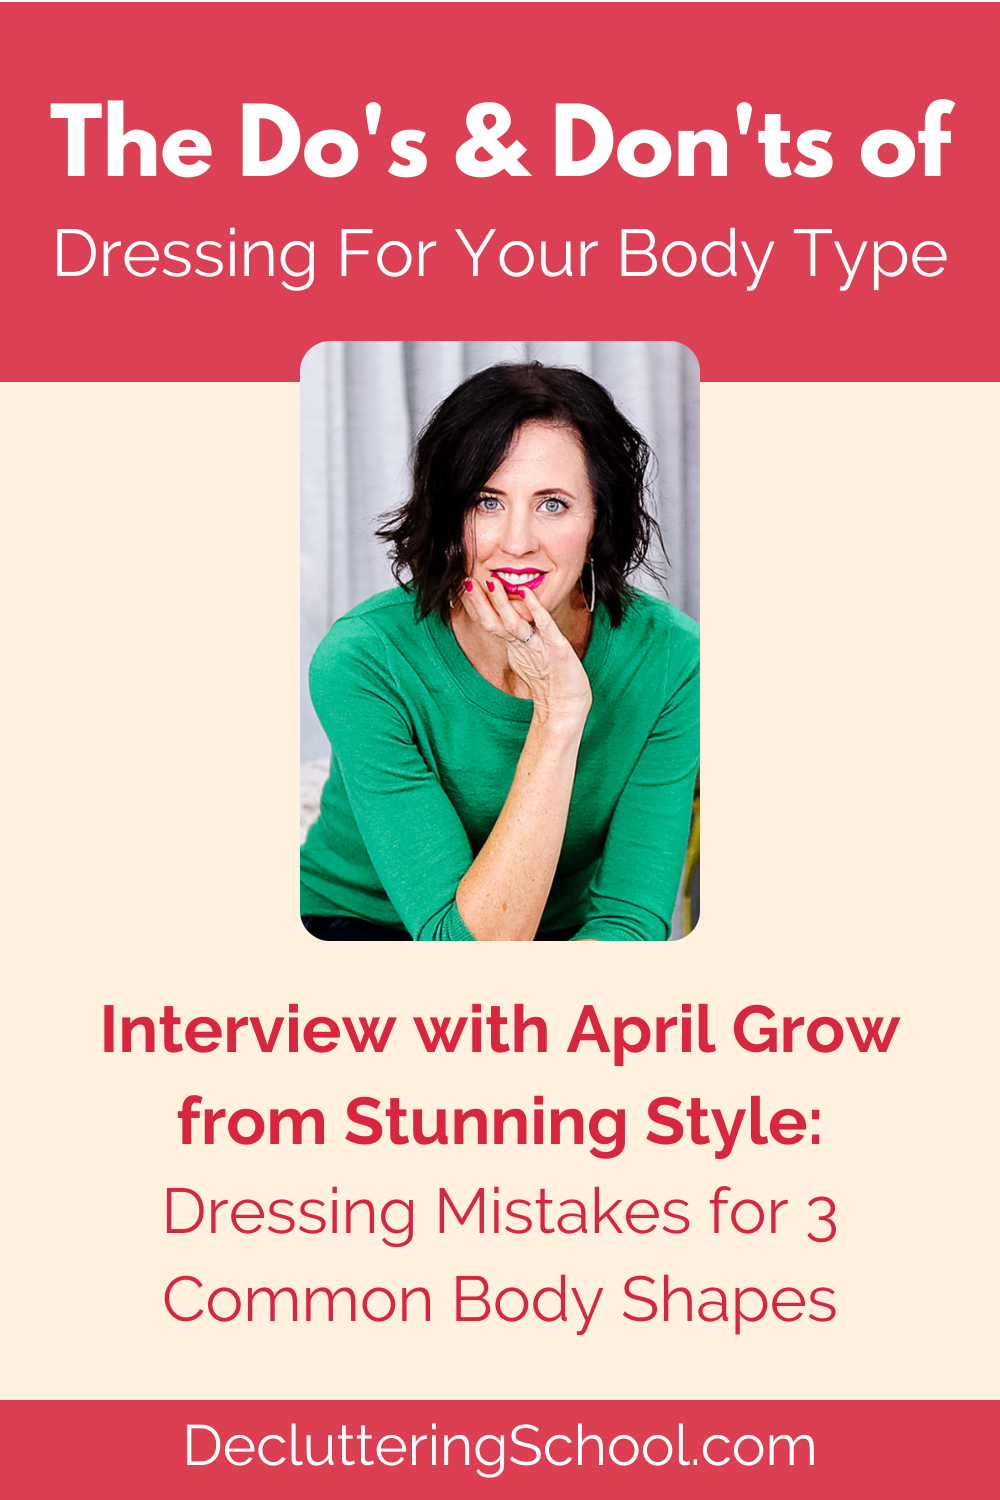 Dressing for your body type and common mistakes of 3 common shapes.